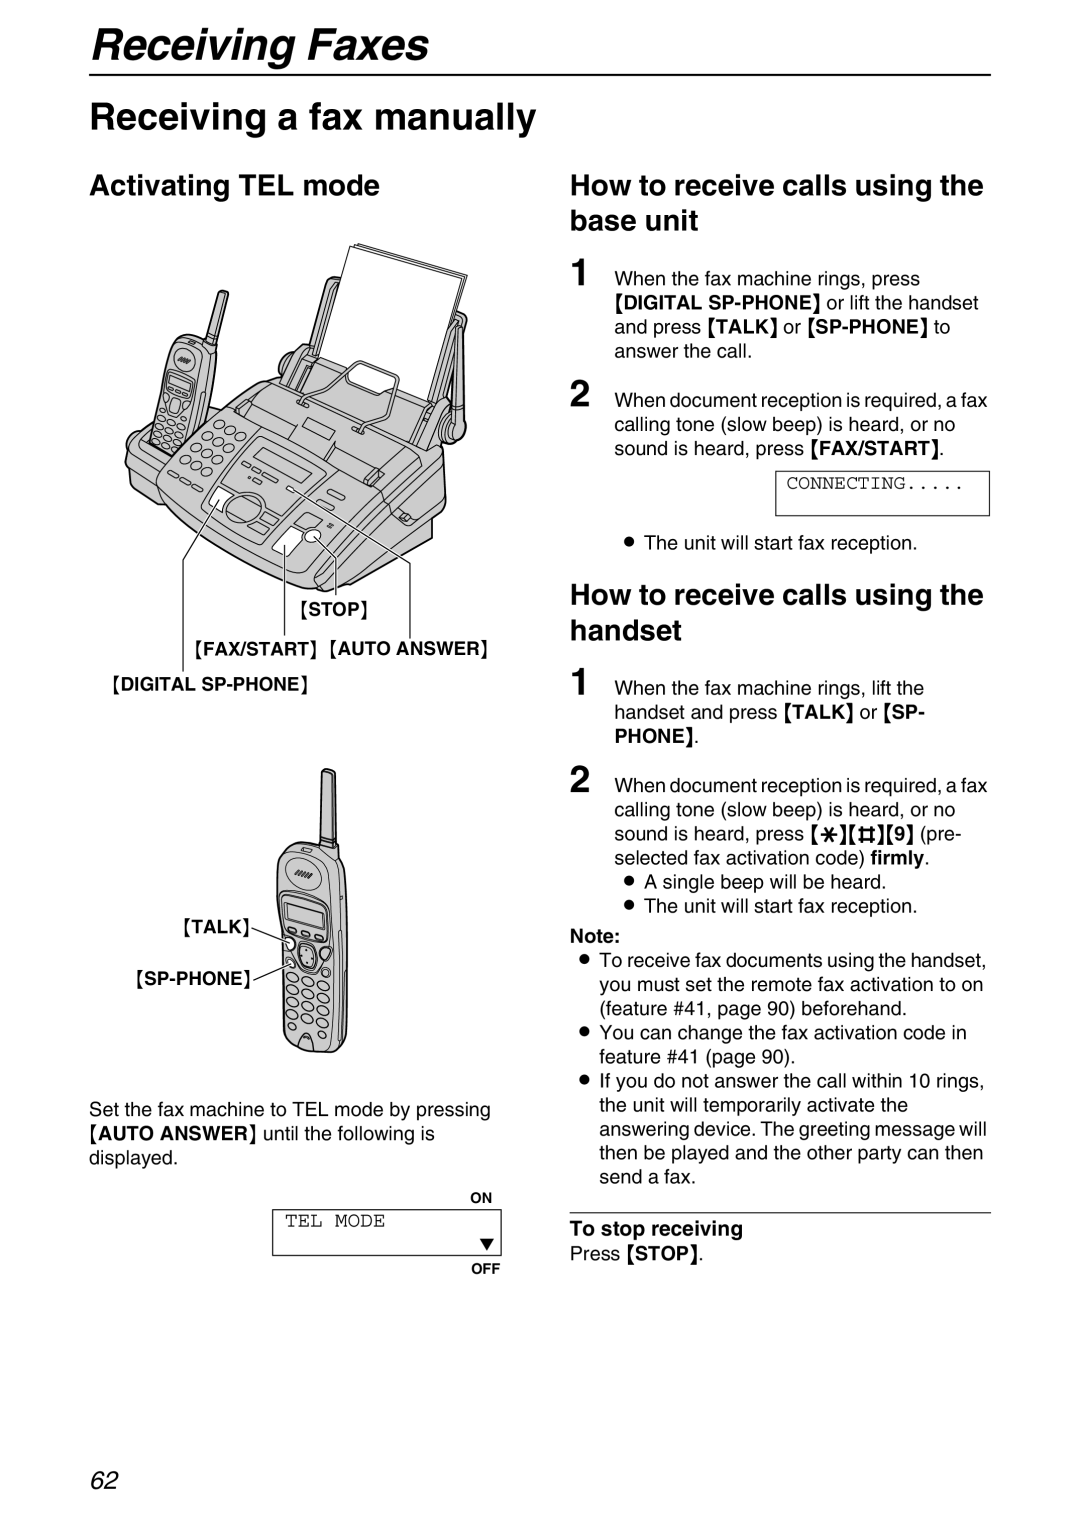 Panasonic KX-FPG371 Receiving Faxes, Receiving a fax manually, Activating TEL mode, How to receive calls using the handset 